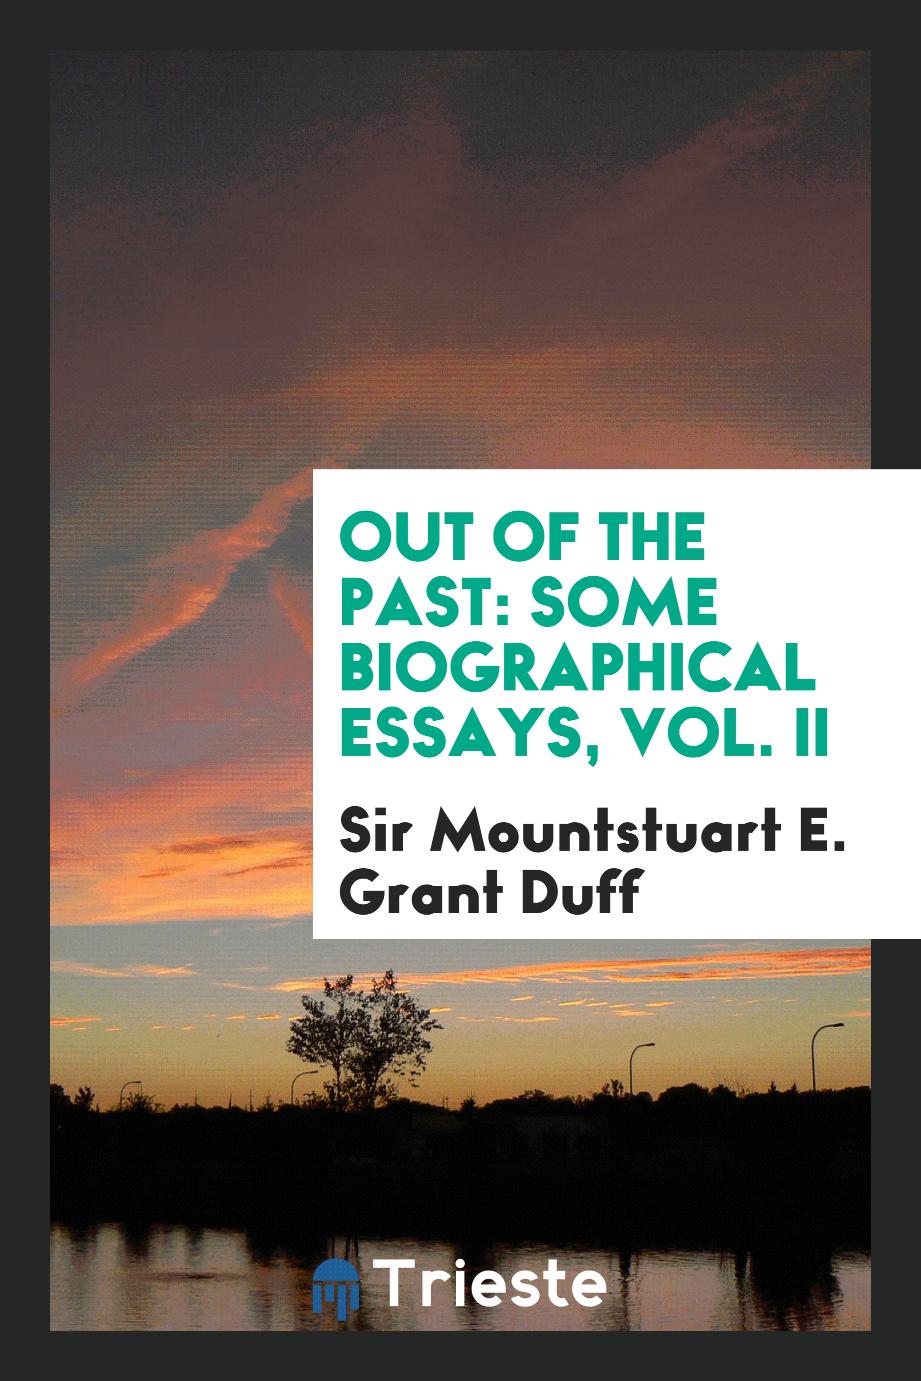 Out of the past: some biographical essays, Vol. II